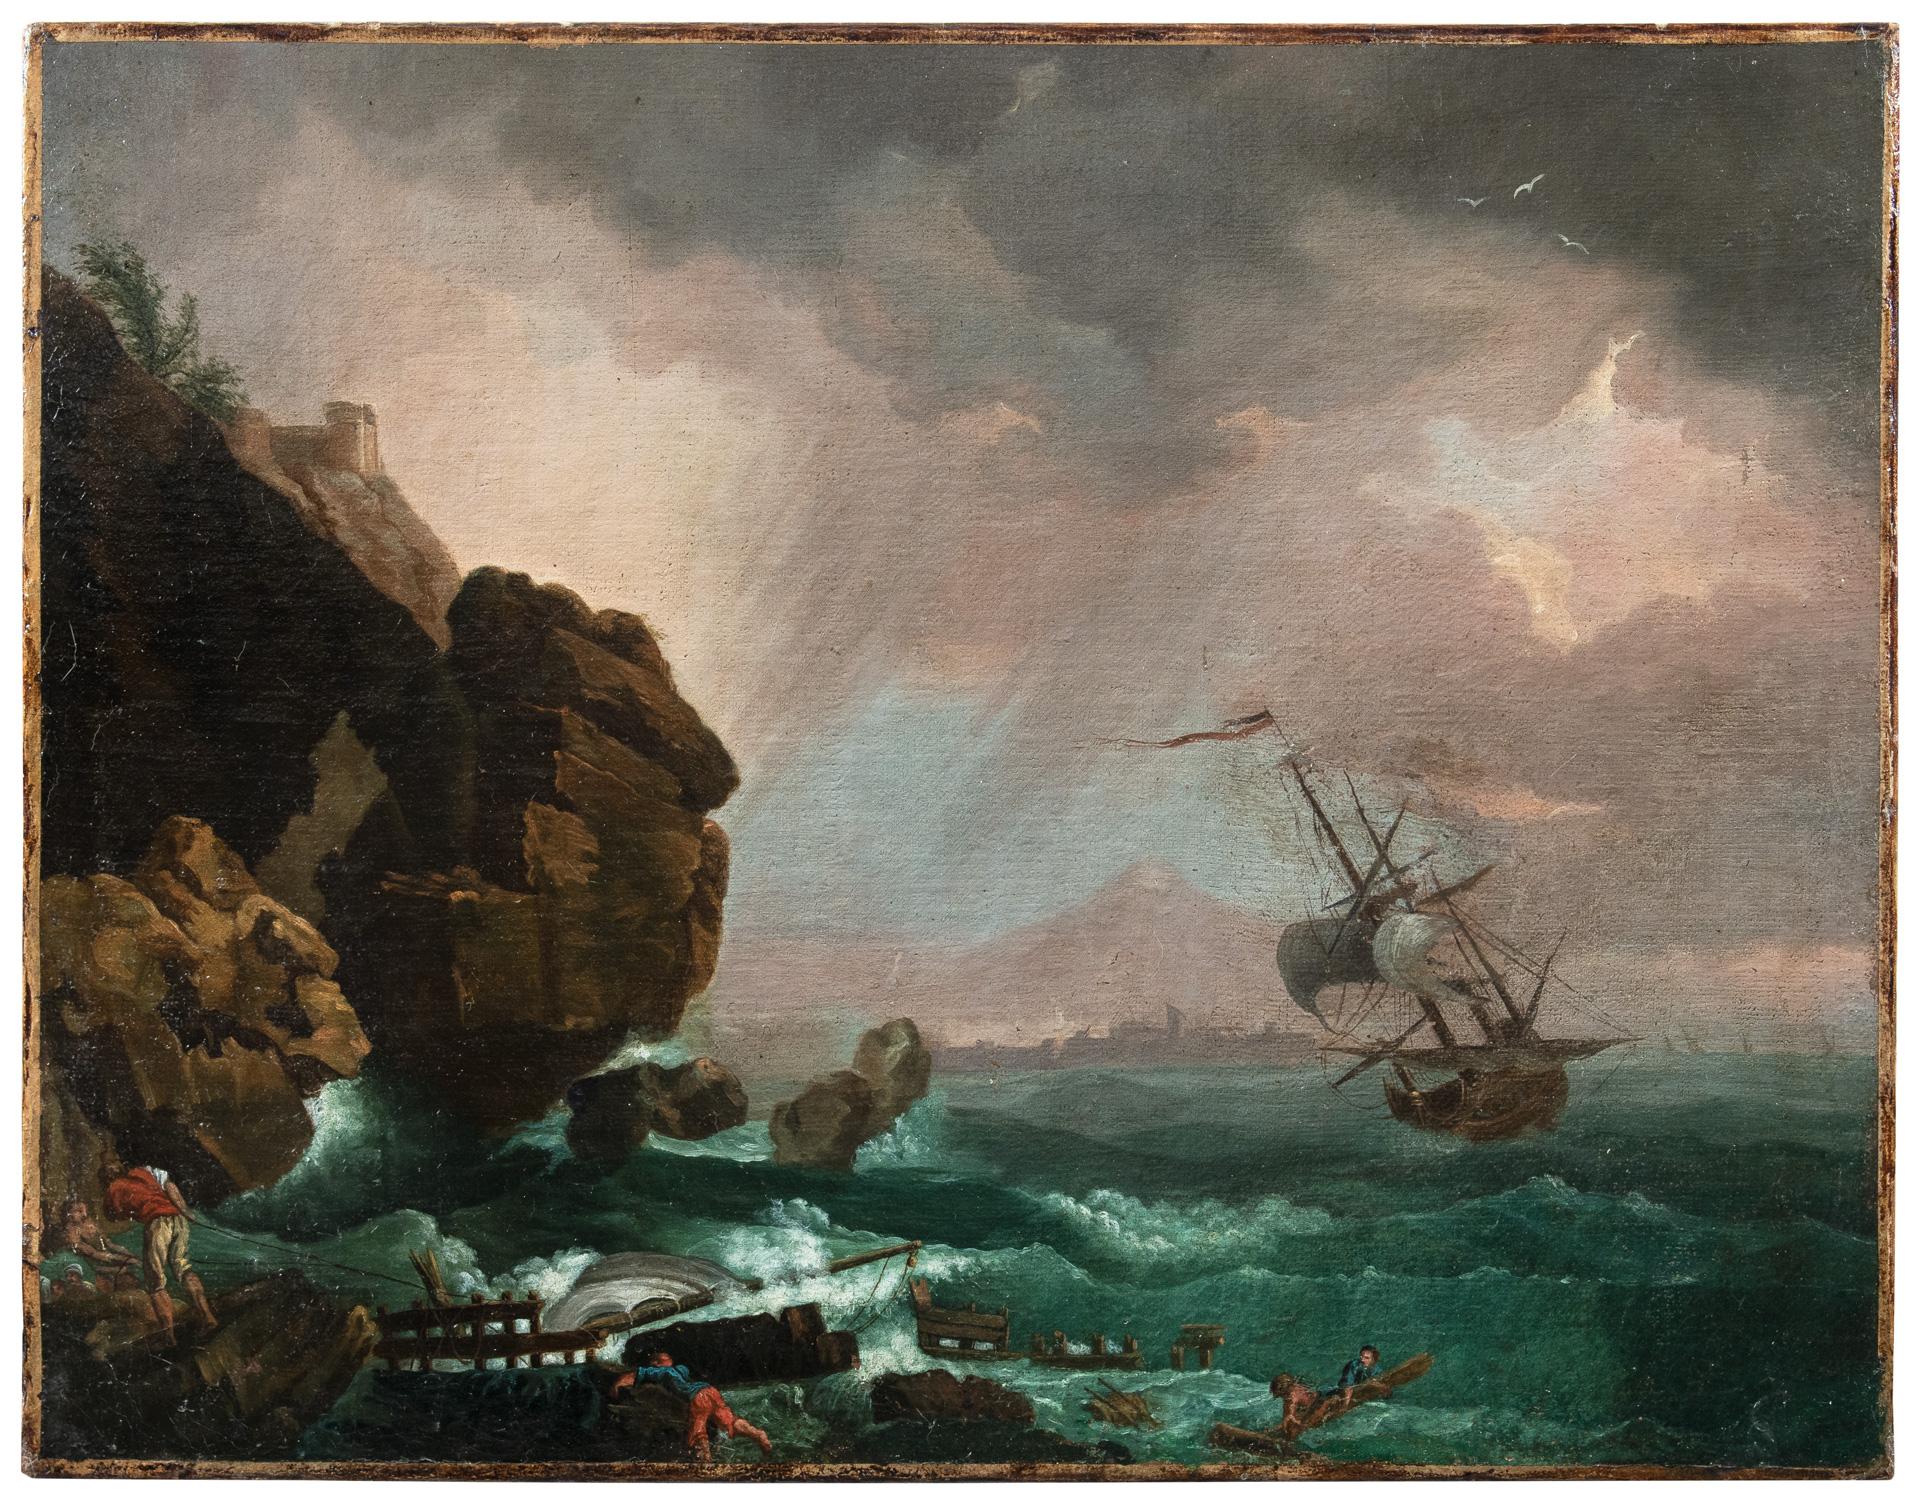 Unknown Landscape Painting - 18th century Italian landscape painting - Sea view - Oil on canvas